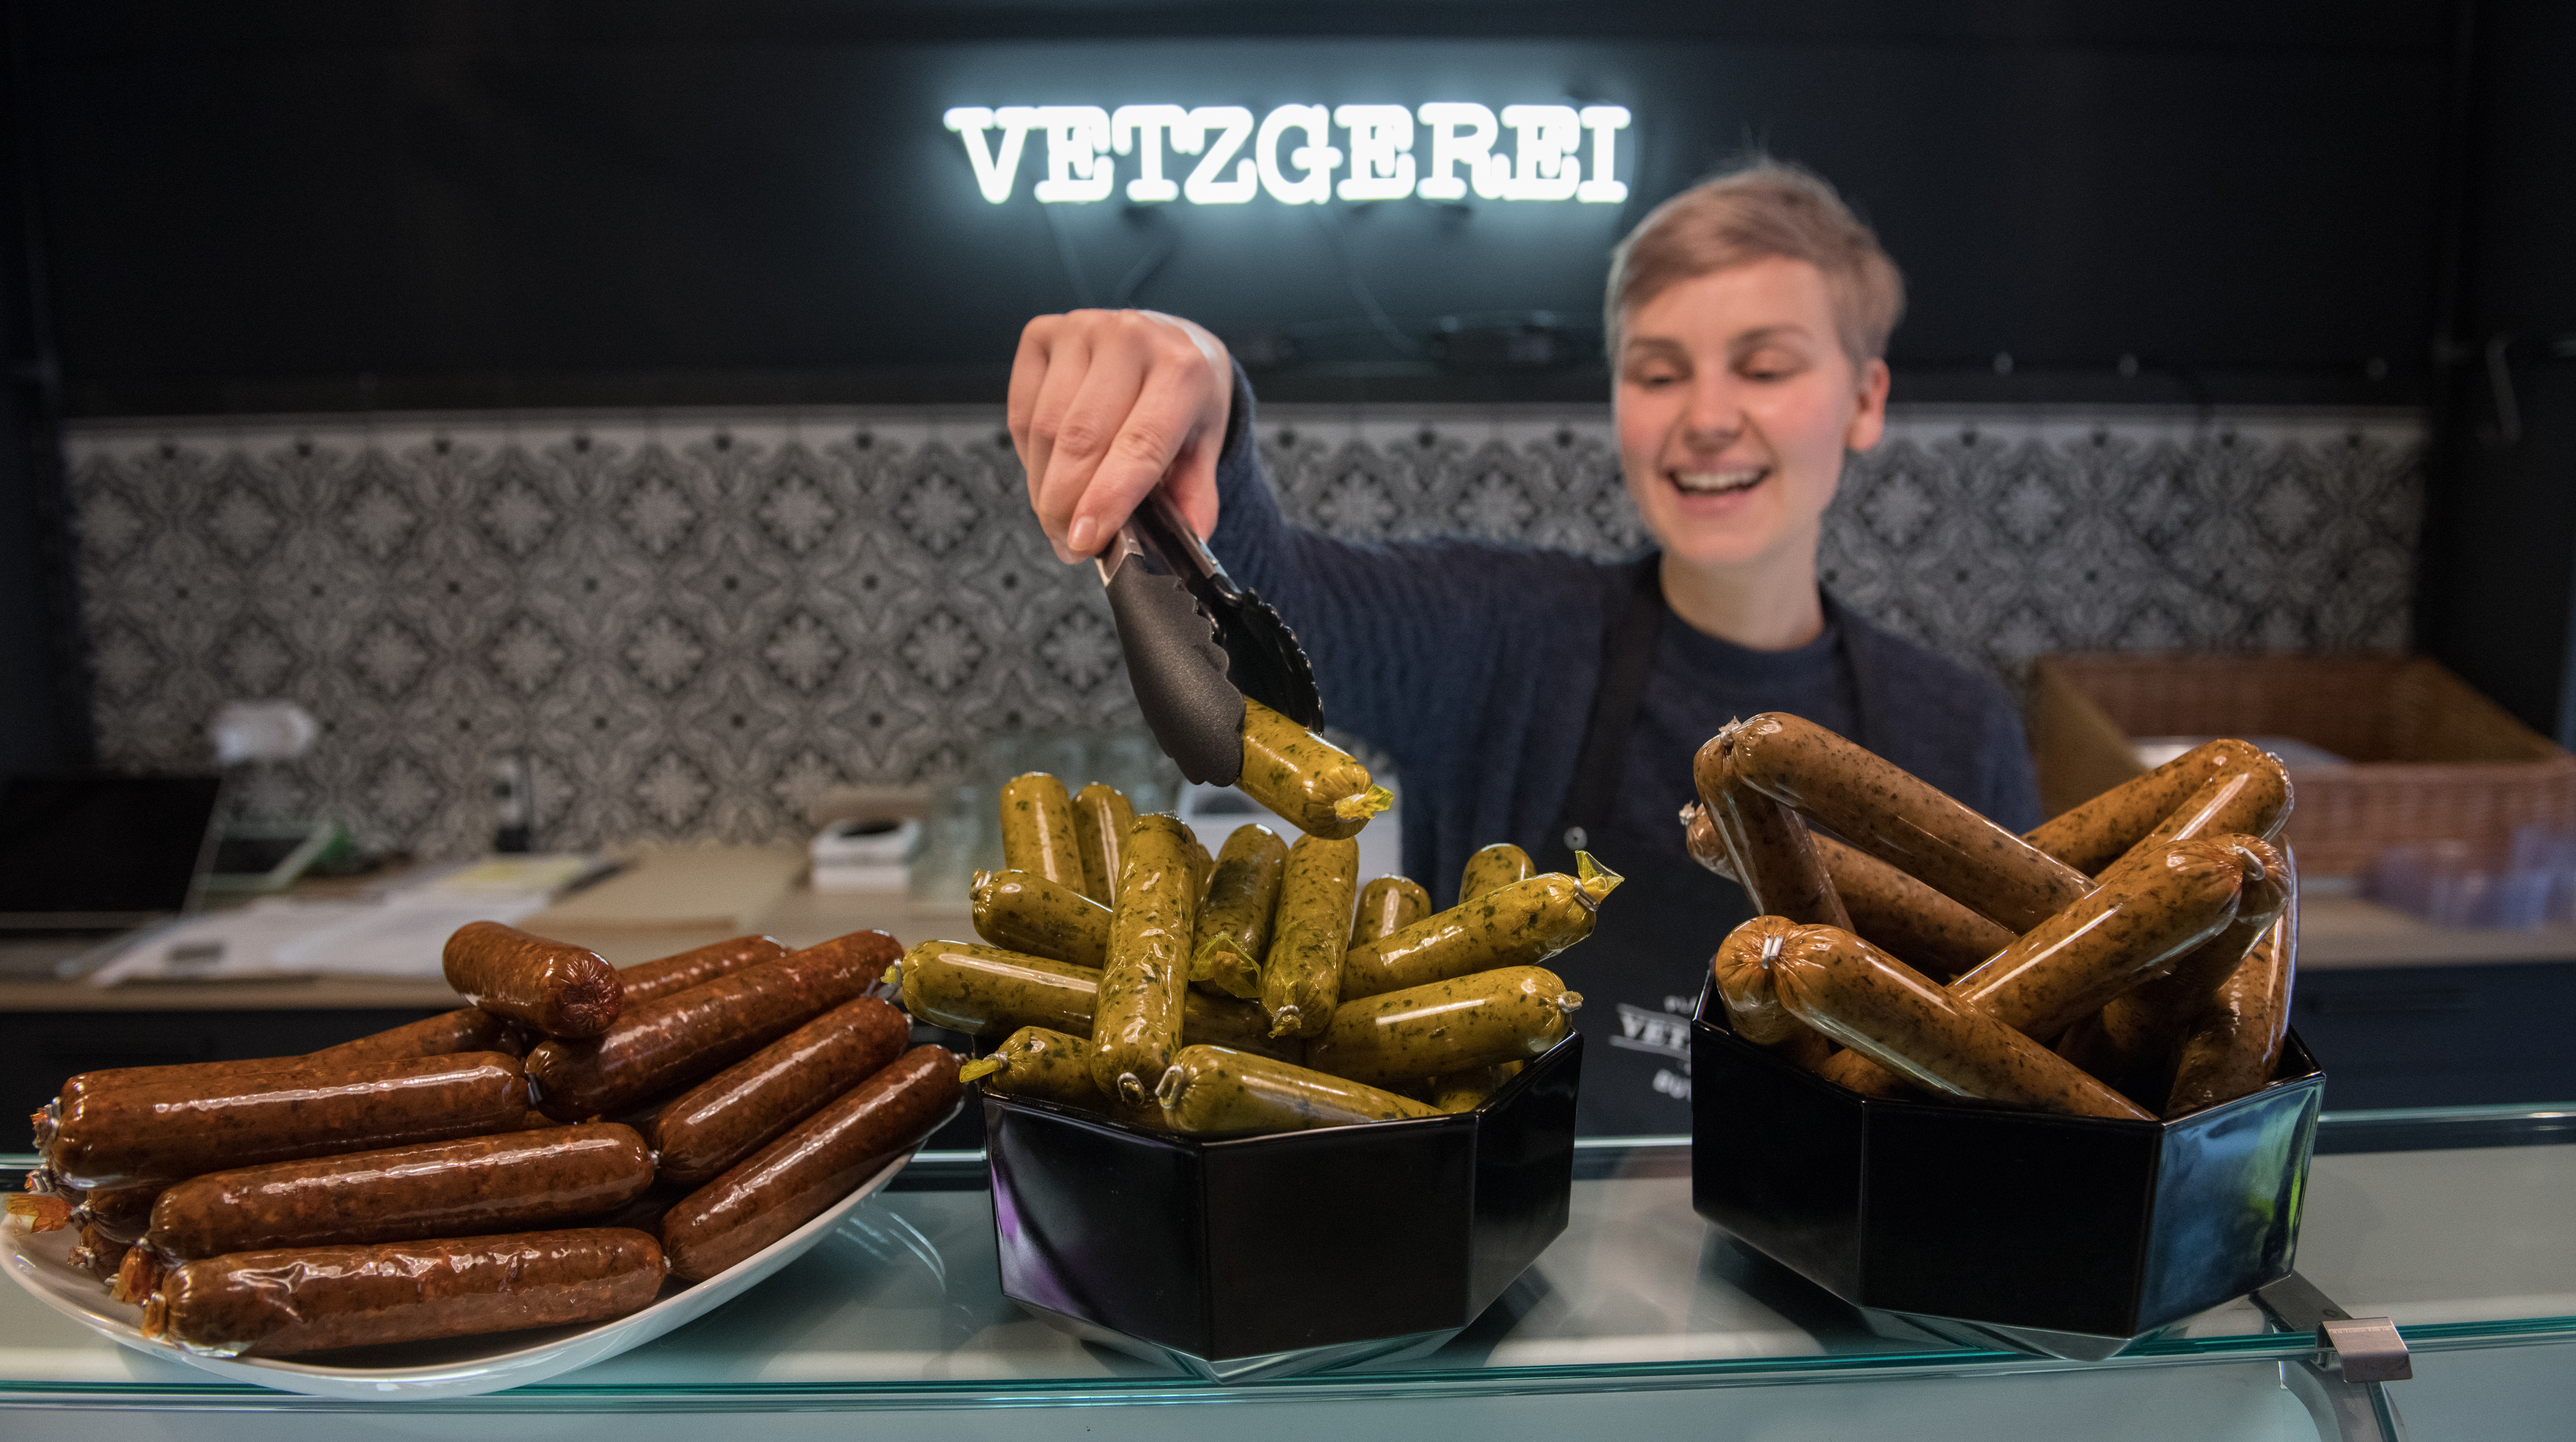 A woman poses with trays of vegan sausages at a vegan shop in Berlin, Germany.